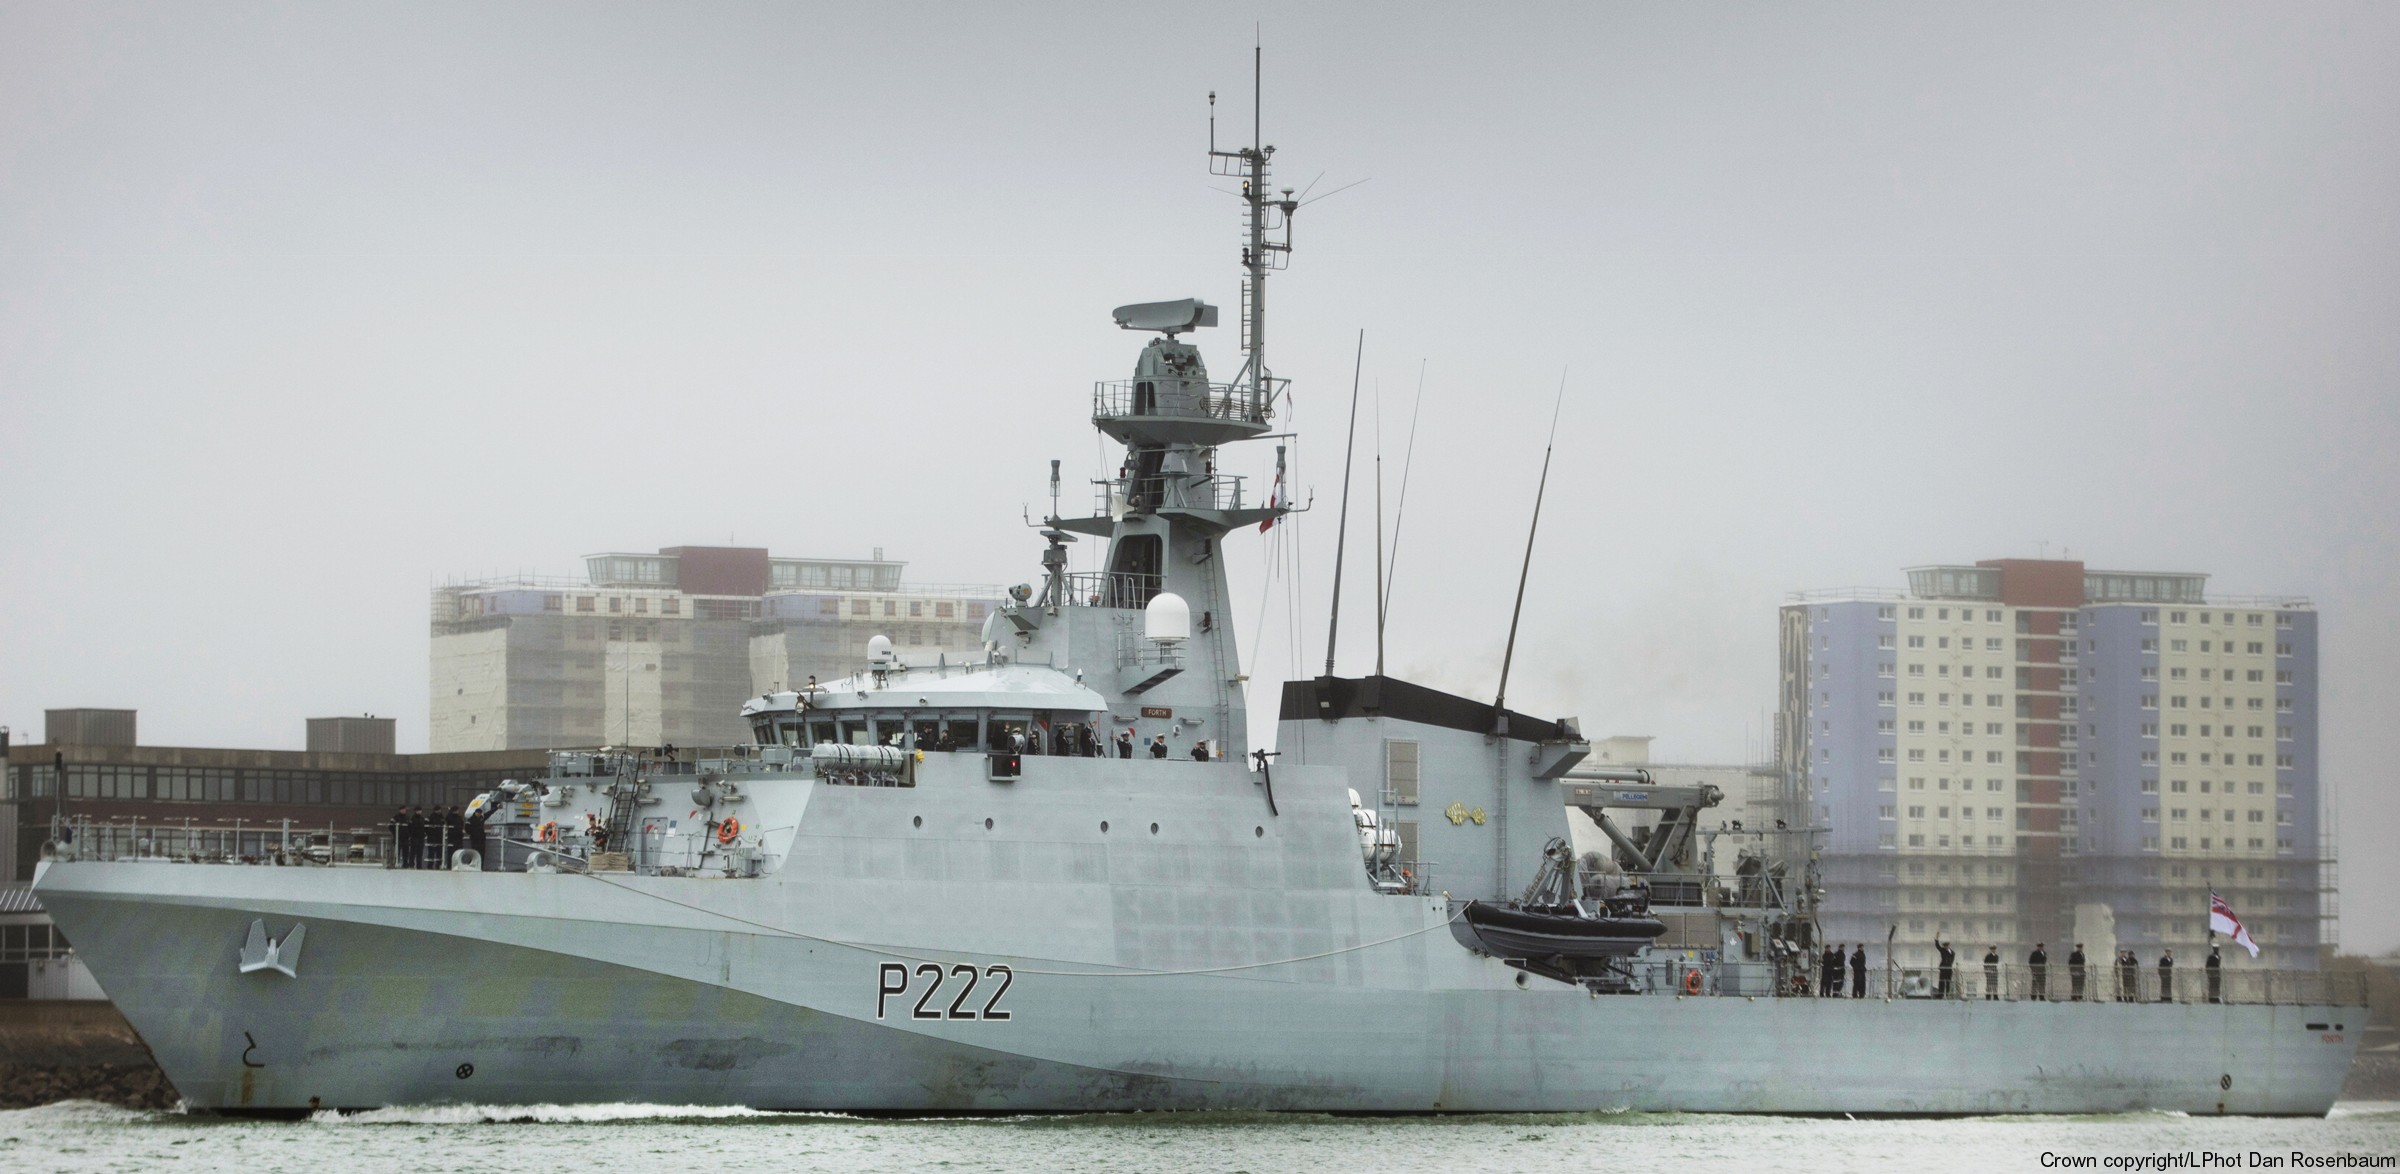 p-222 hms forth river class offshore patrol vessel opv royal navy 15